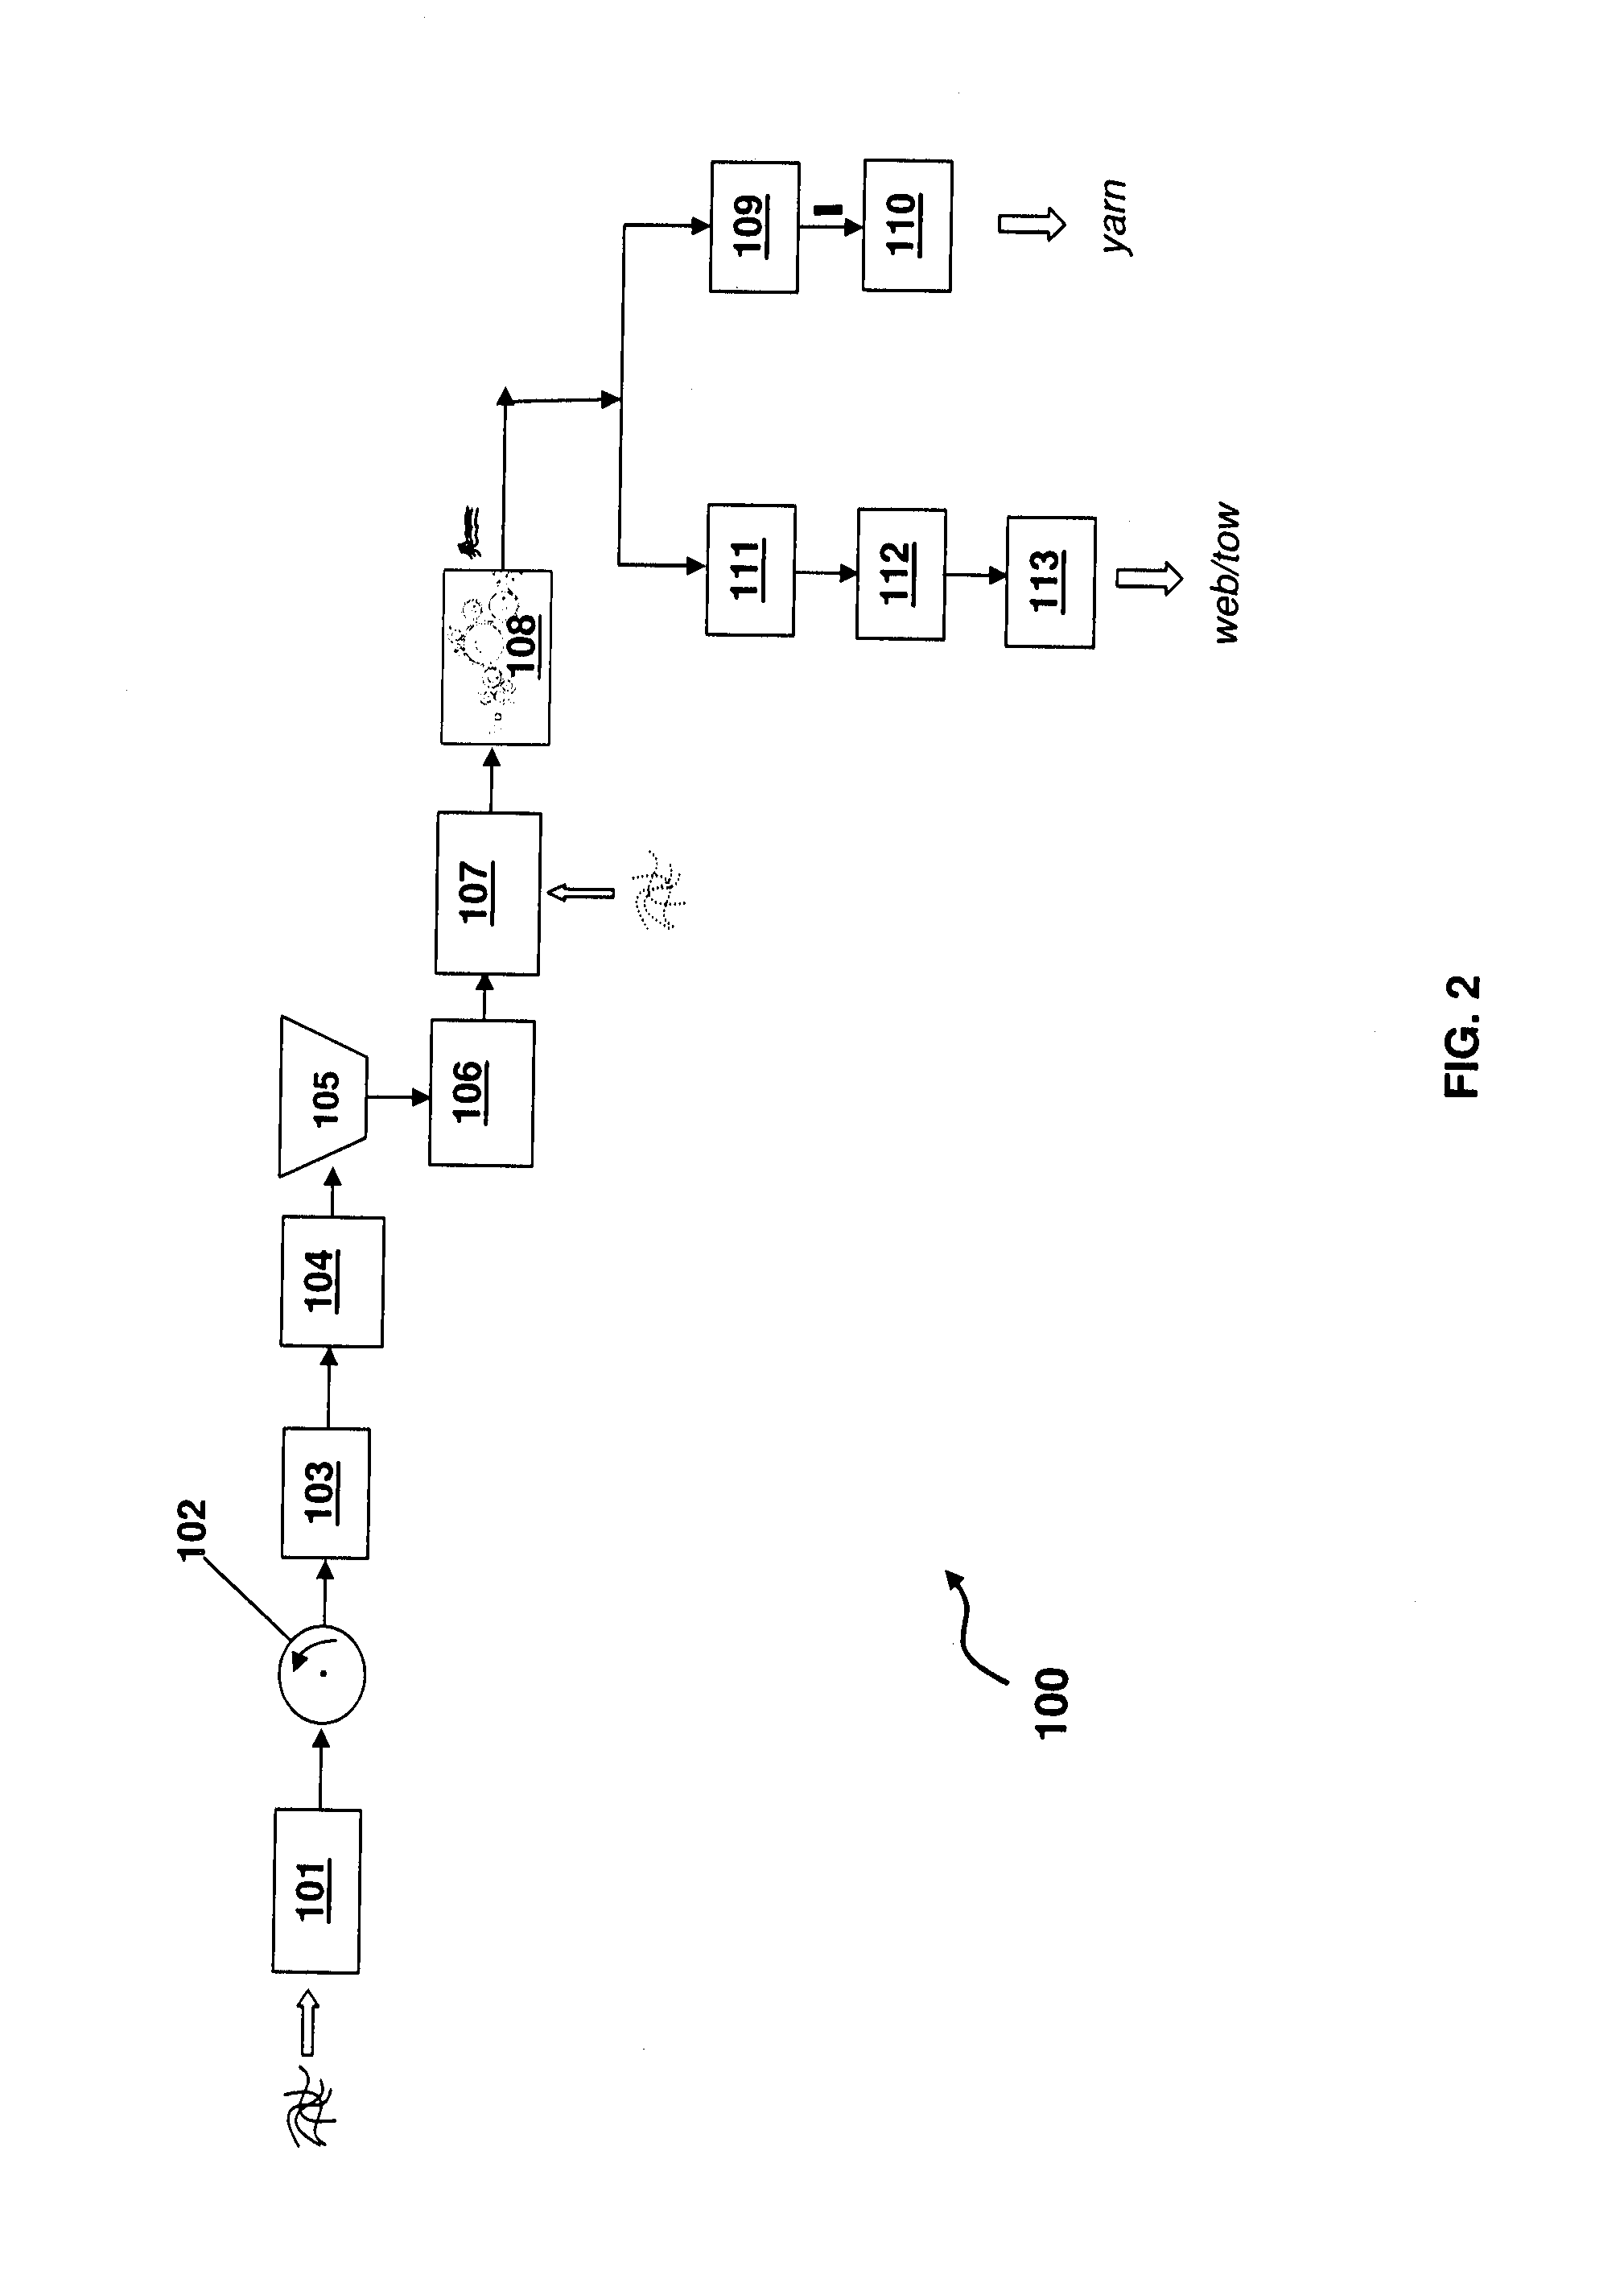 Method for the manufacturing of yarns from recycled carbon fibers